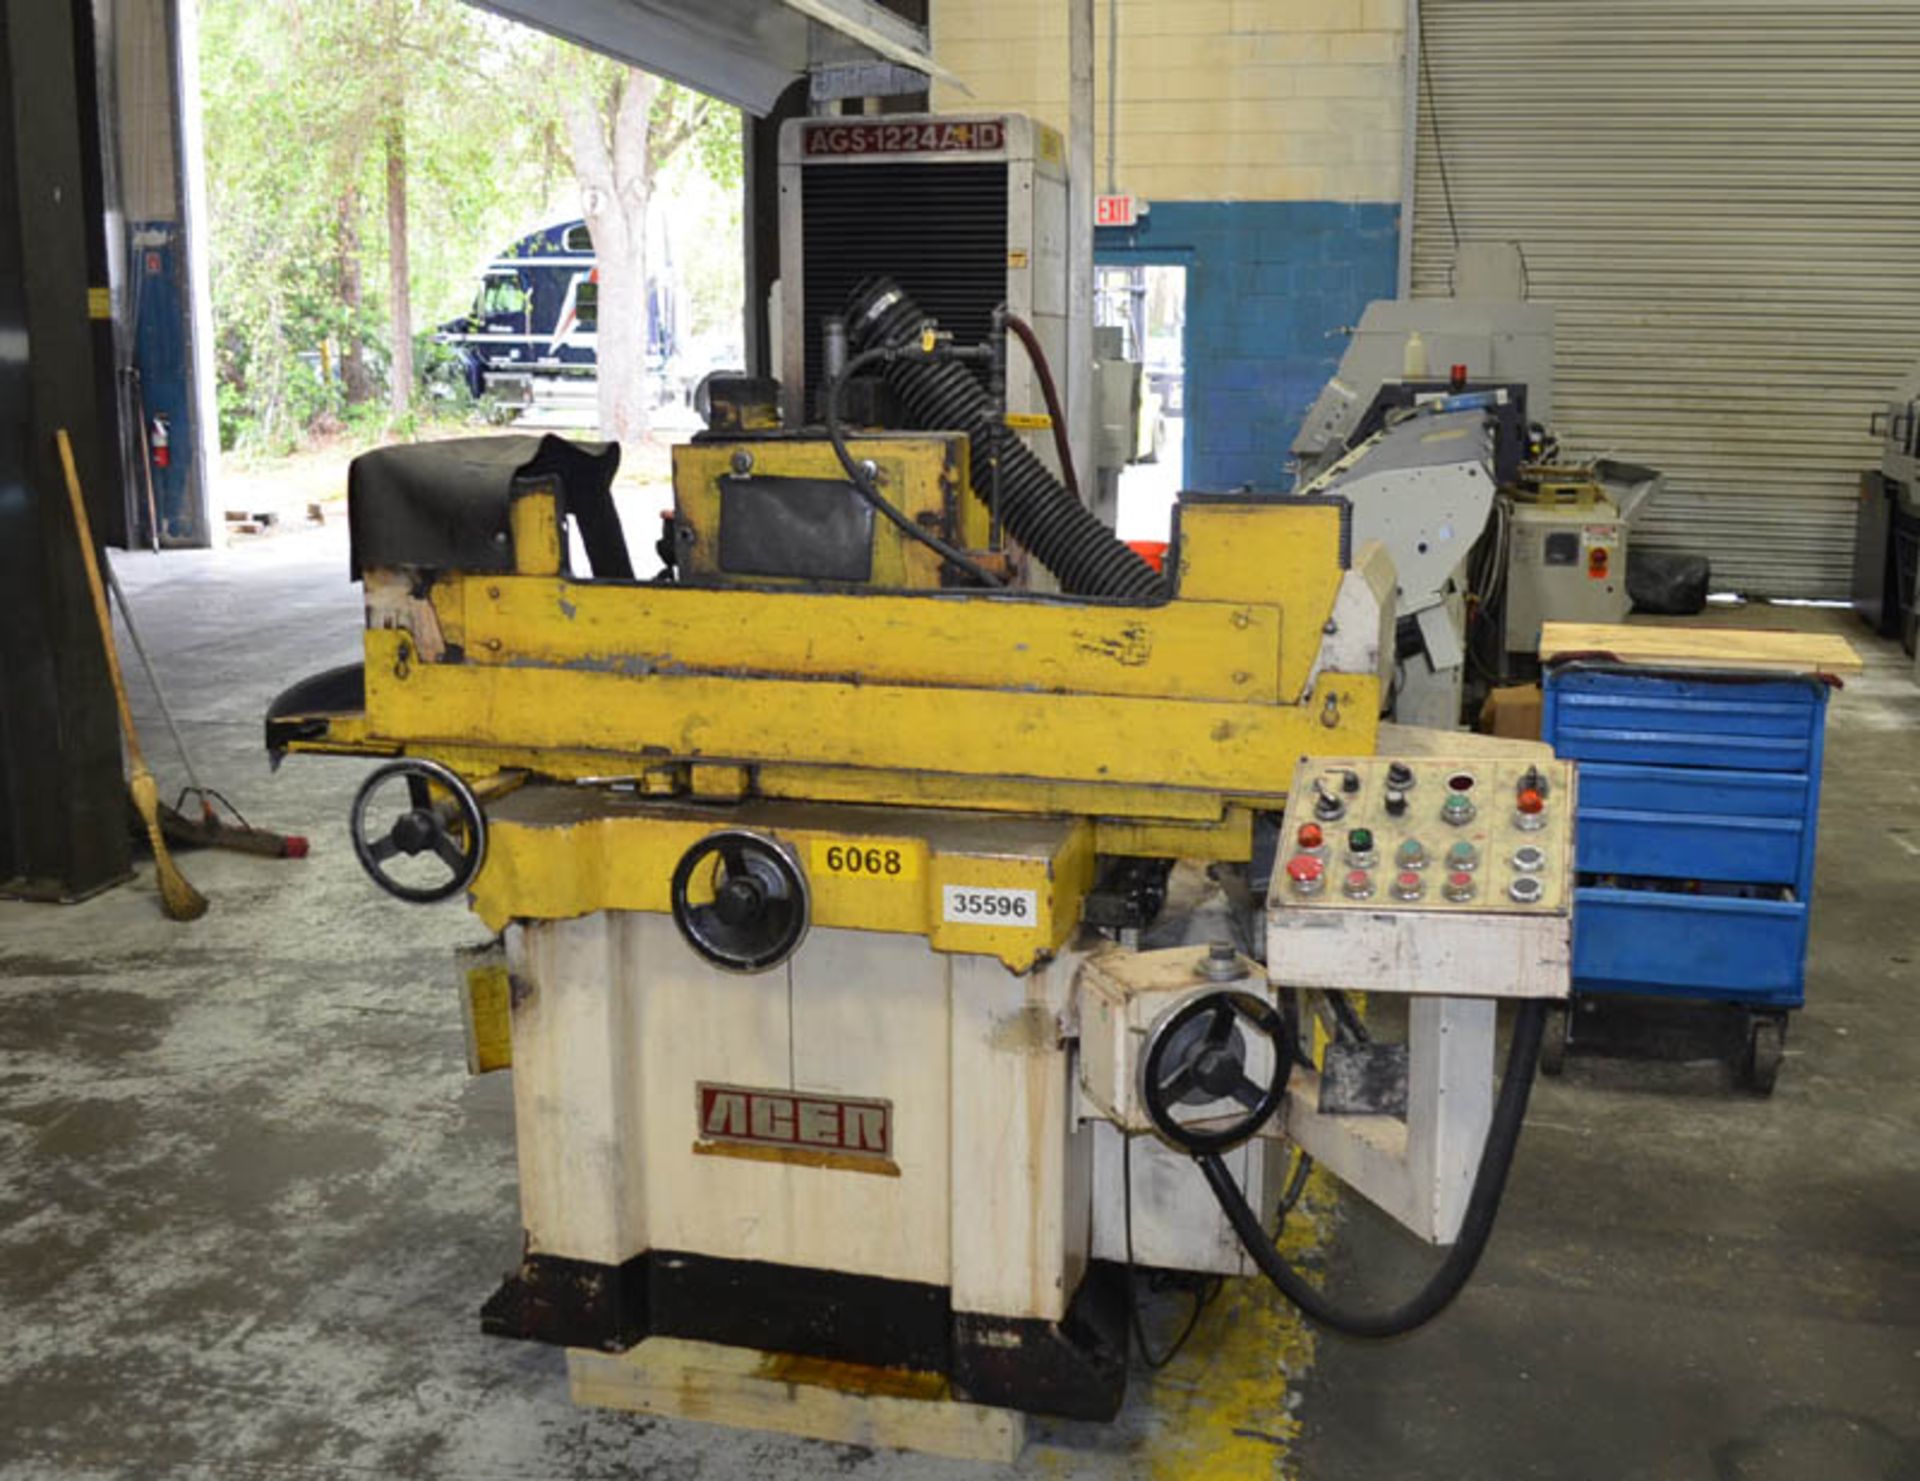 Acer Model AGS-14 AHD 12" x 24" Automatic Hydraulic Surface Grinder with 12" x 24" Electromagnetic